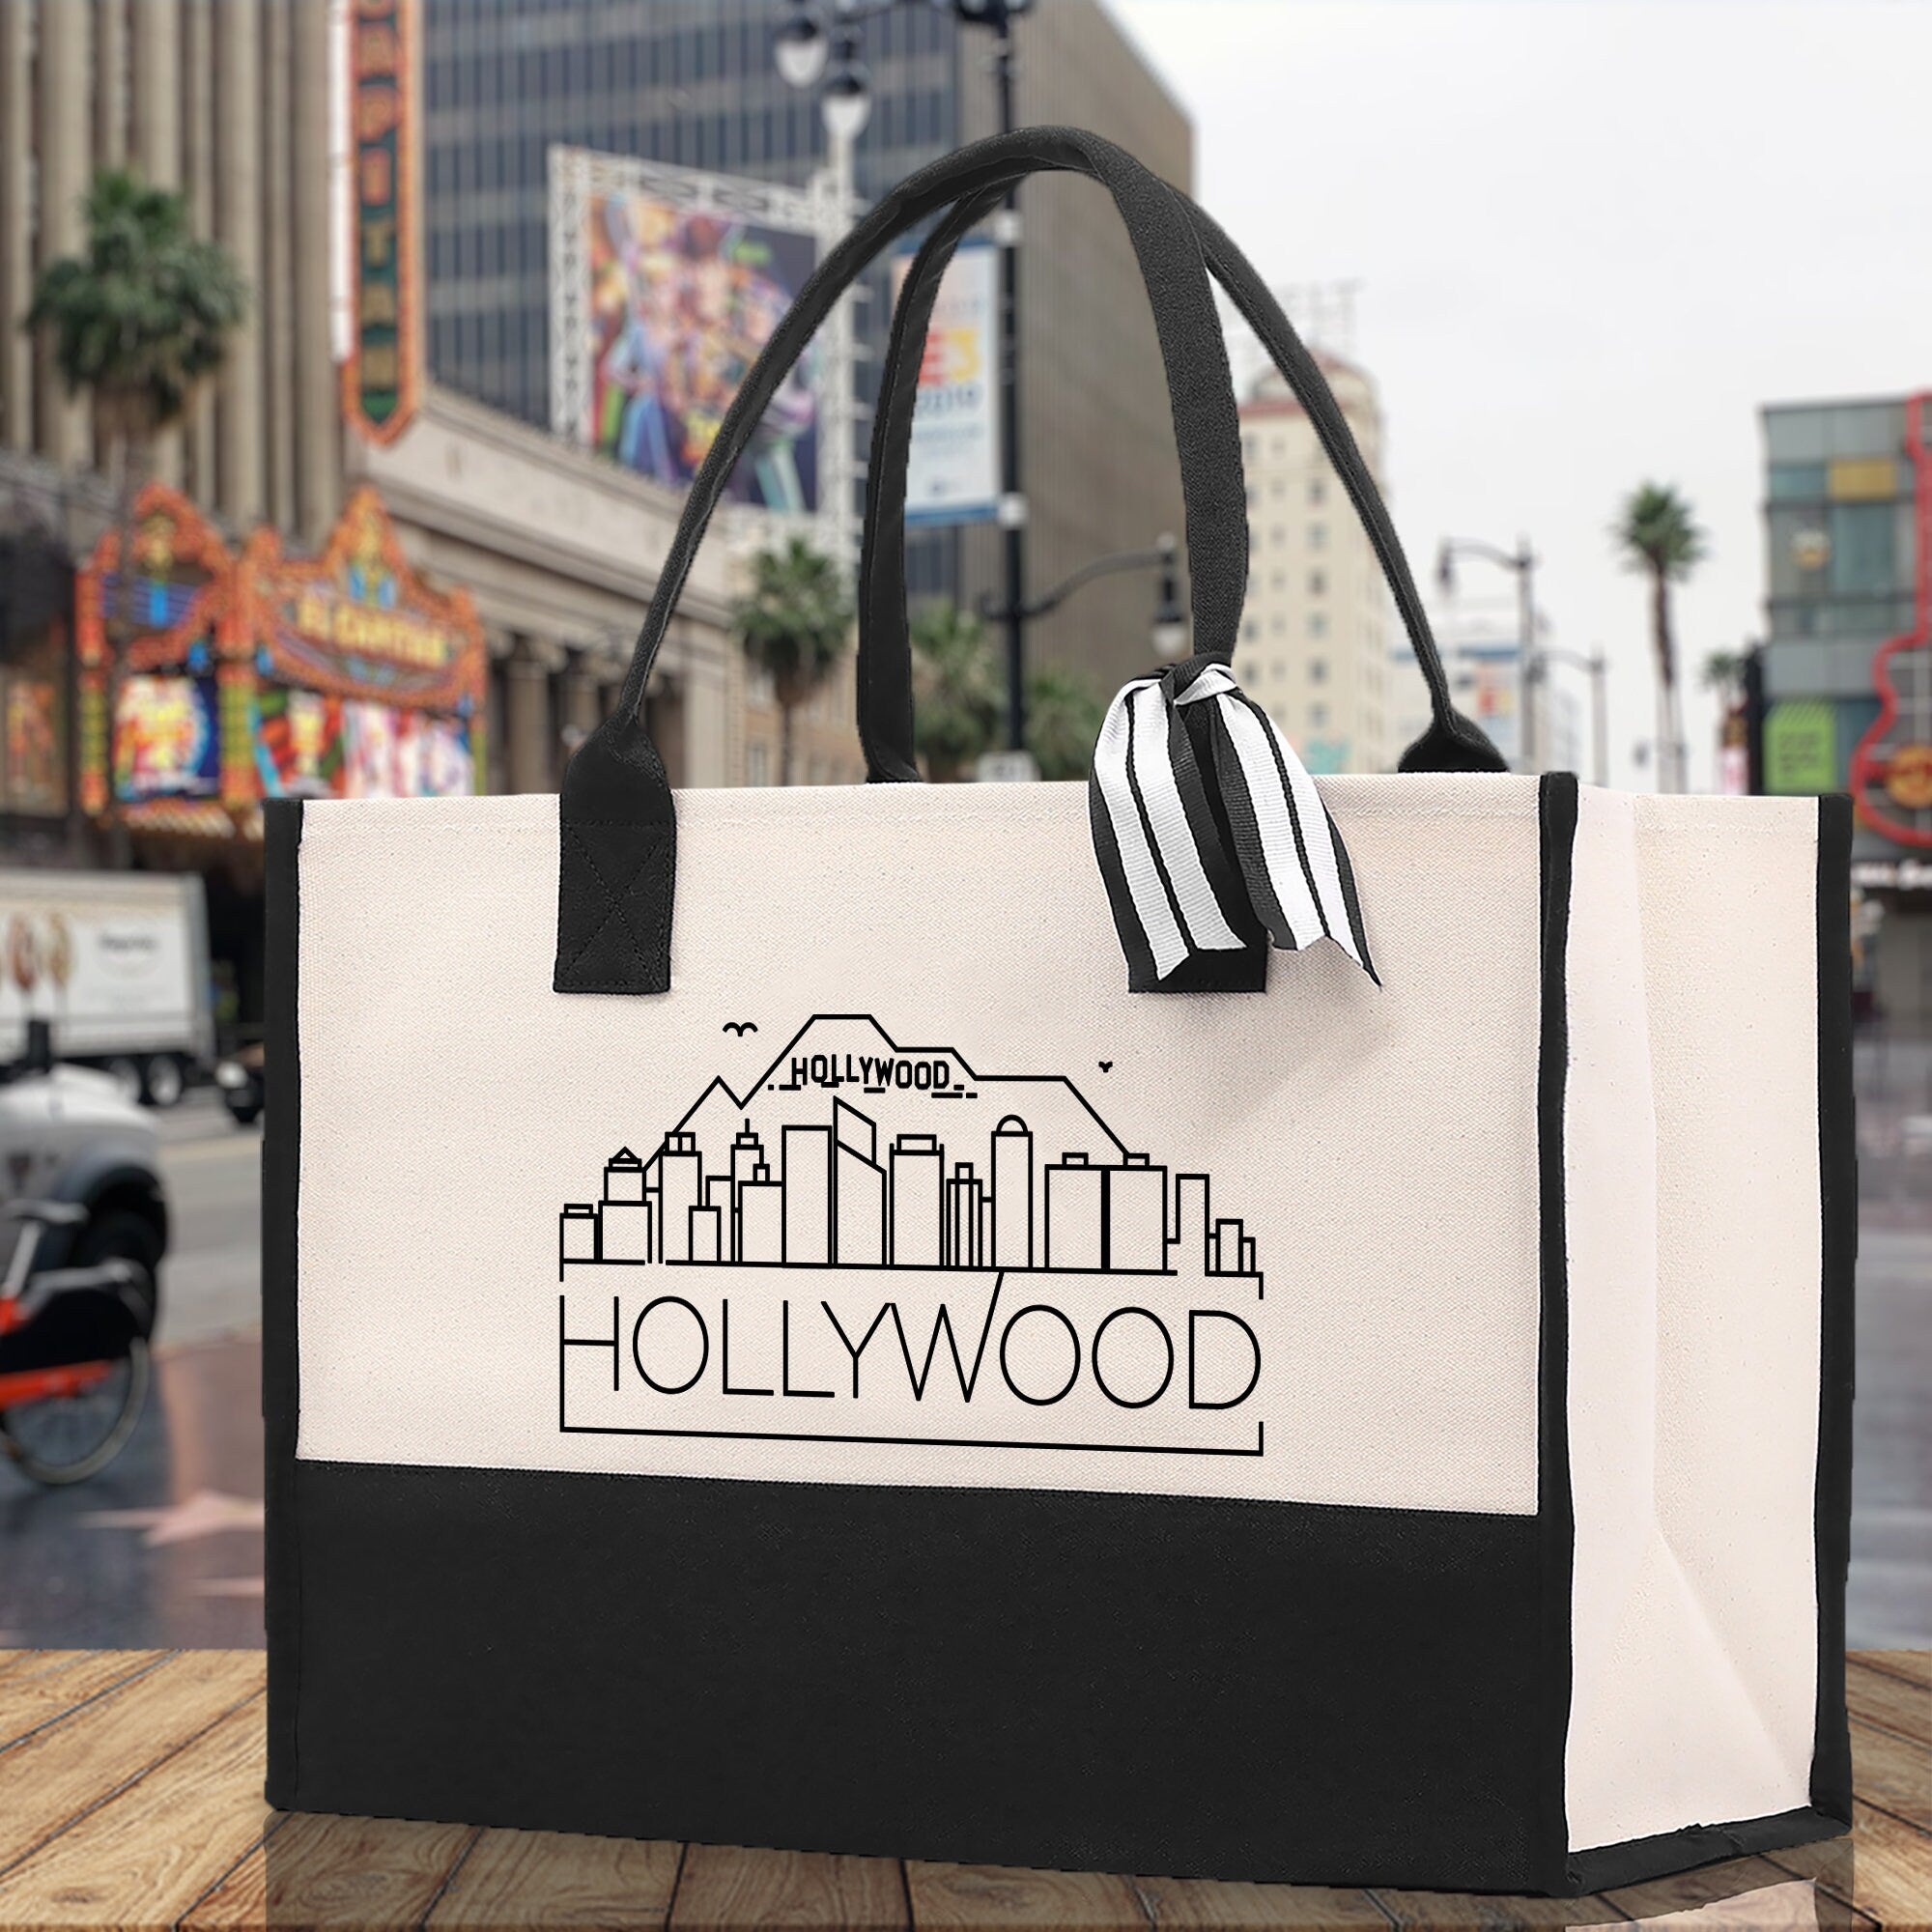 Hollywood Cotton Canvas Tote Bag Travel Vacation Tote Employee and Client Gift Wedding Favor Birthday Welcome Tote Bag Bridesmaid Gift